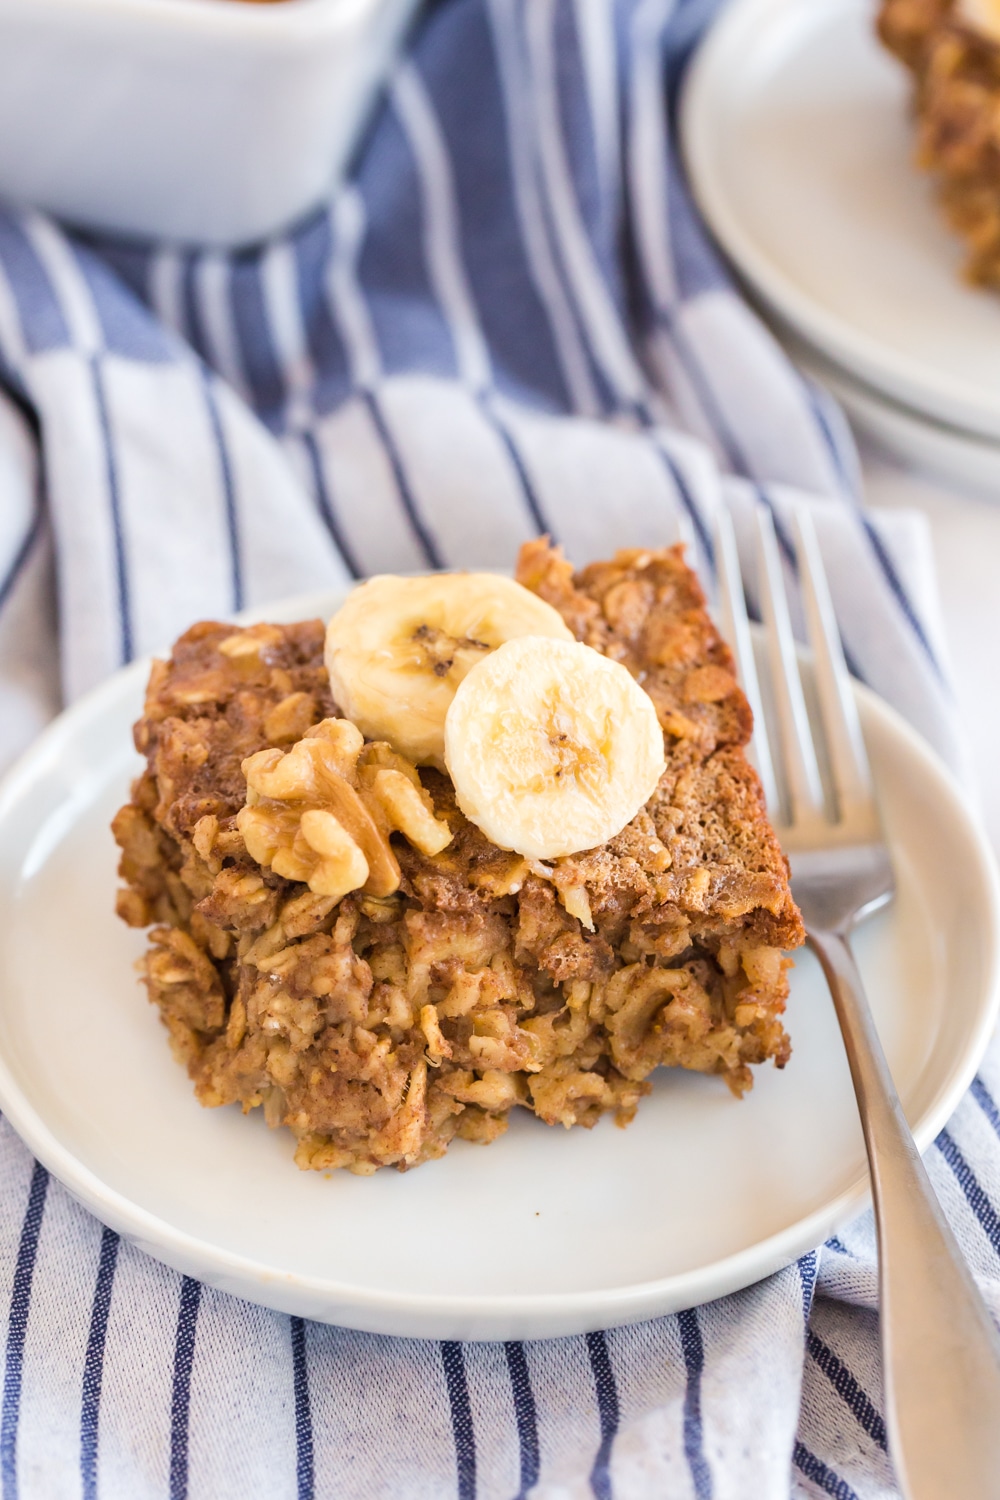 baked oatmeal with banana slices